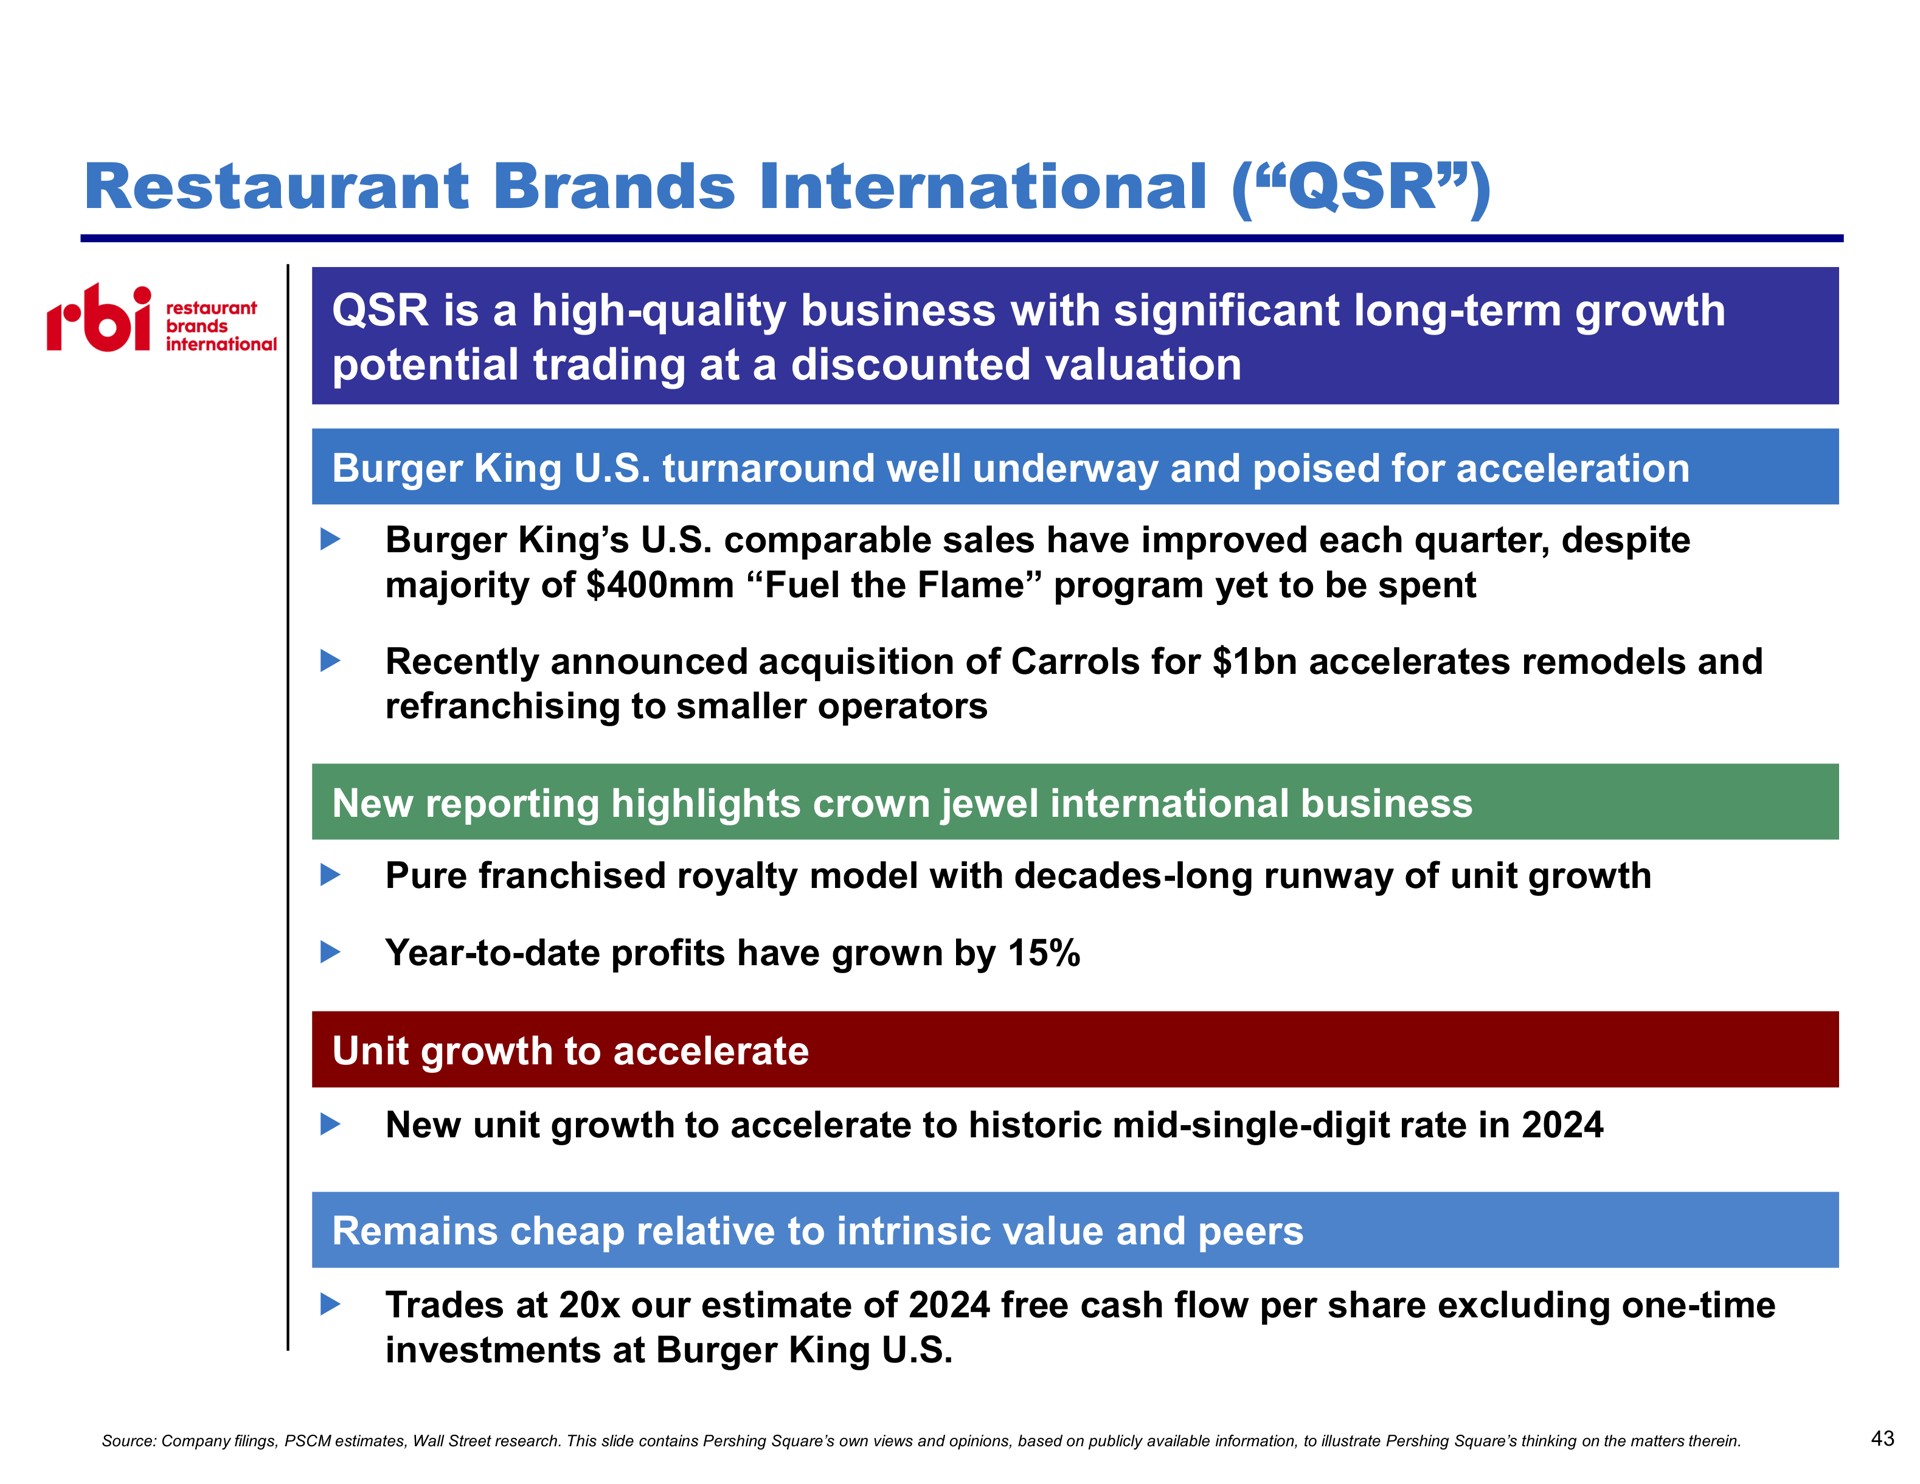 restaurant brands international is a high quality business with significant long term growth potential trading at a discounted valuation roi mes late melee me met | Pershing Square